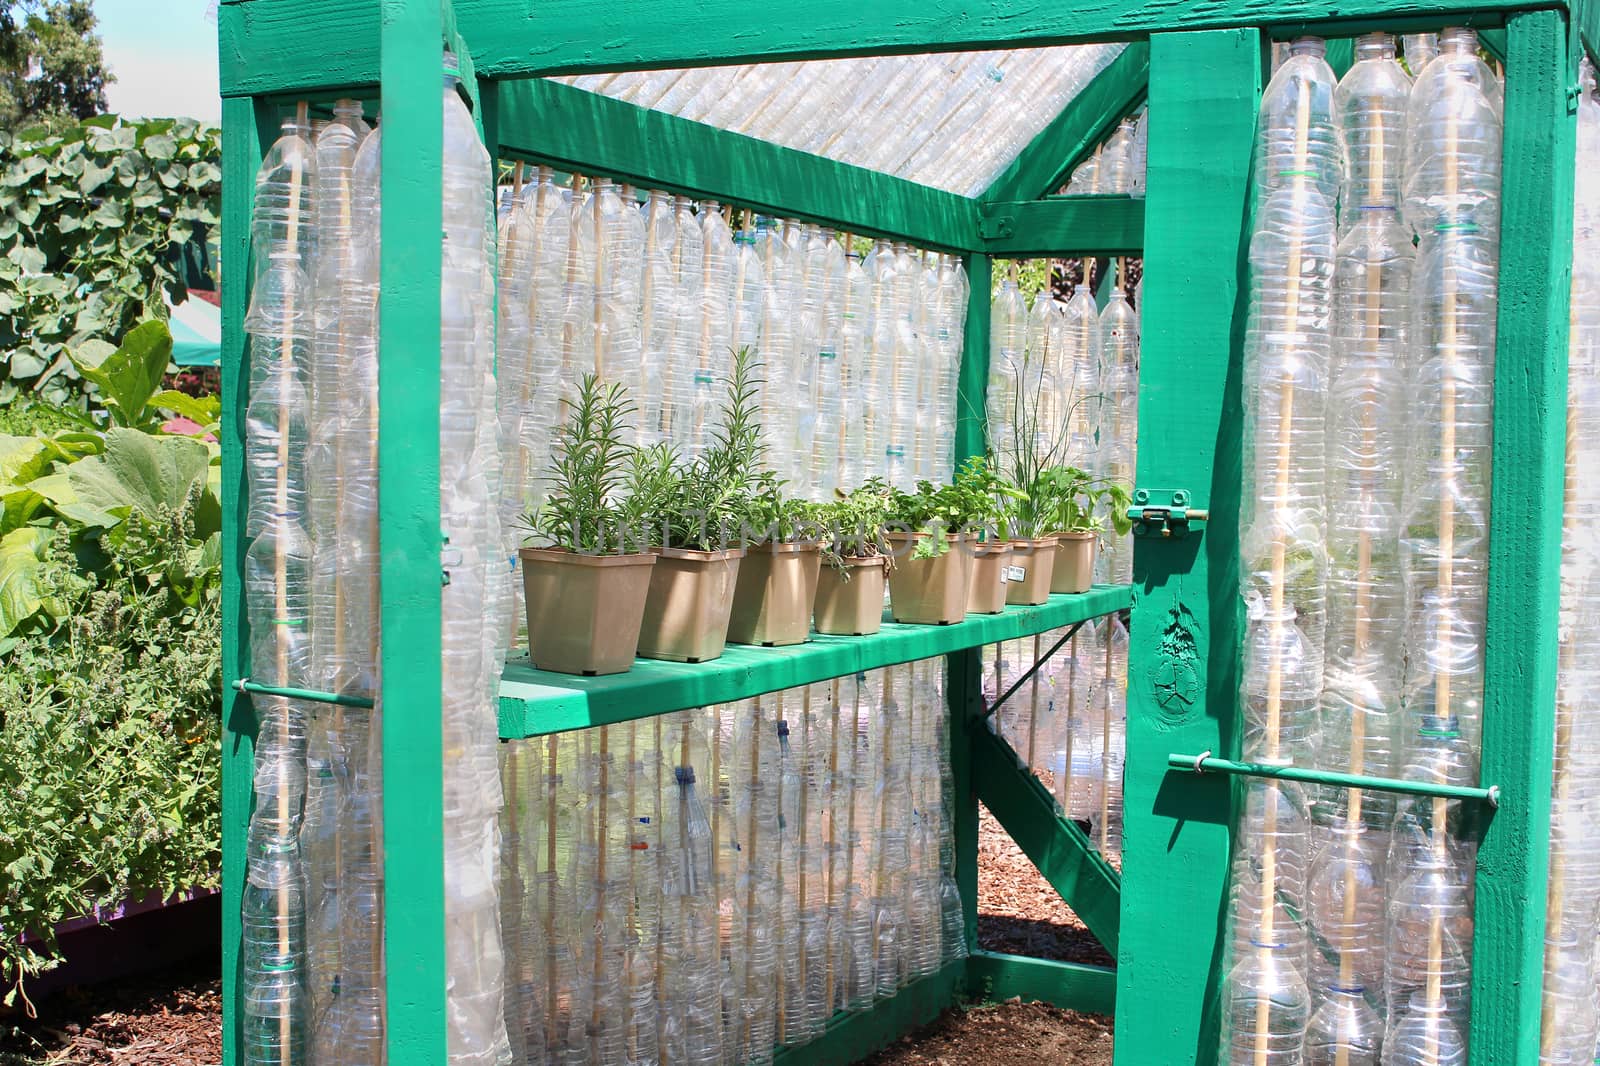 Greenhouse from recycled bottles